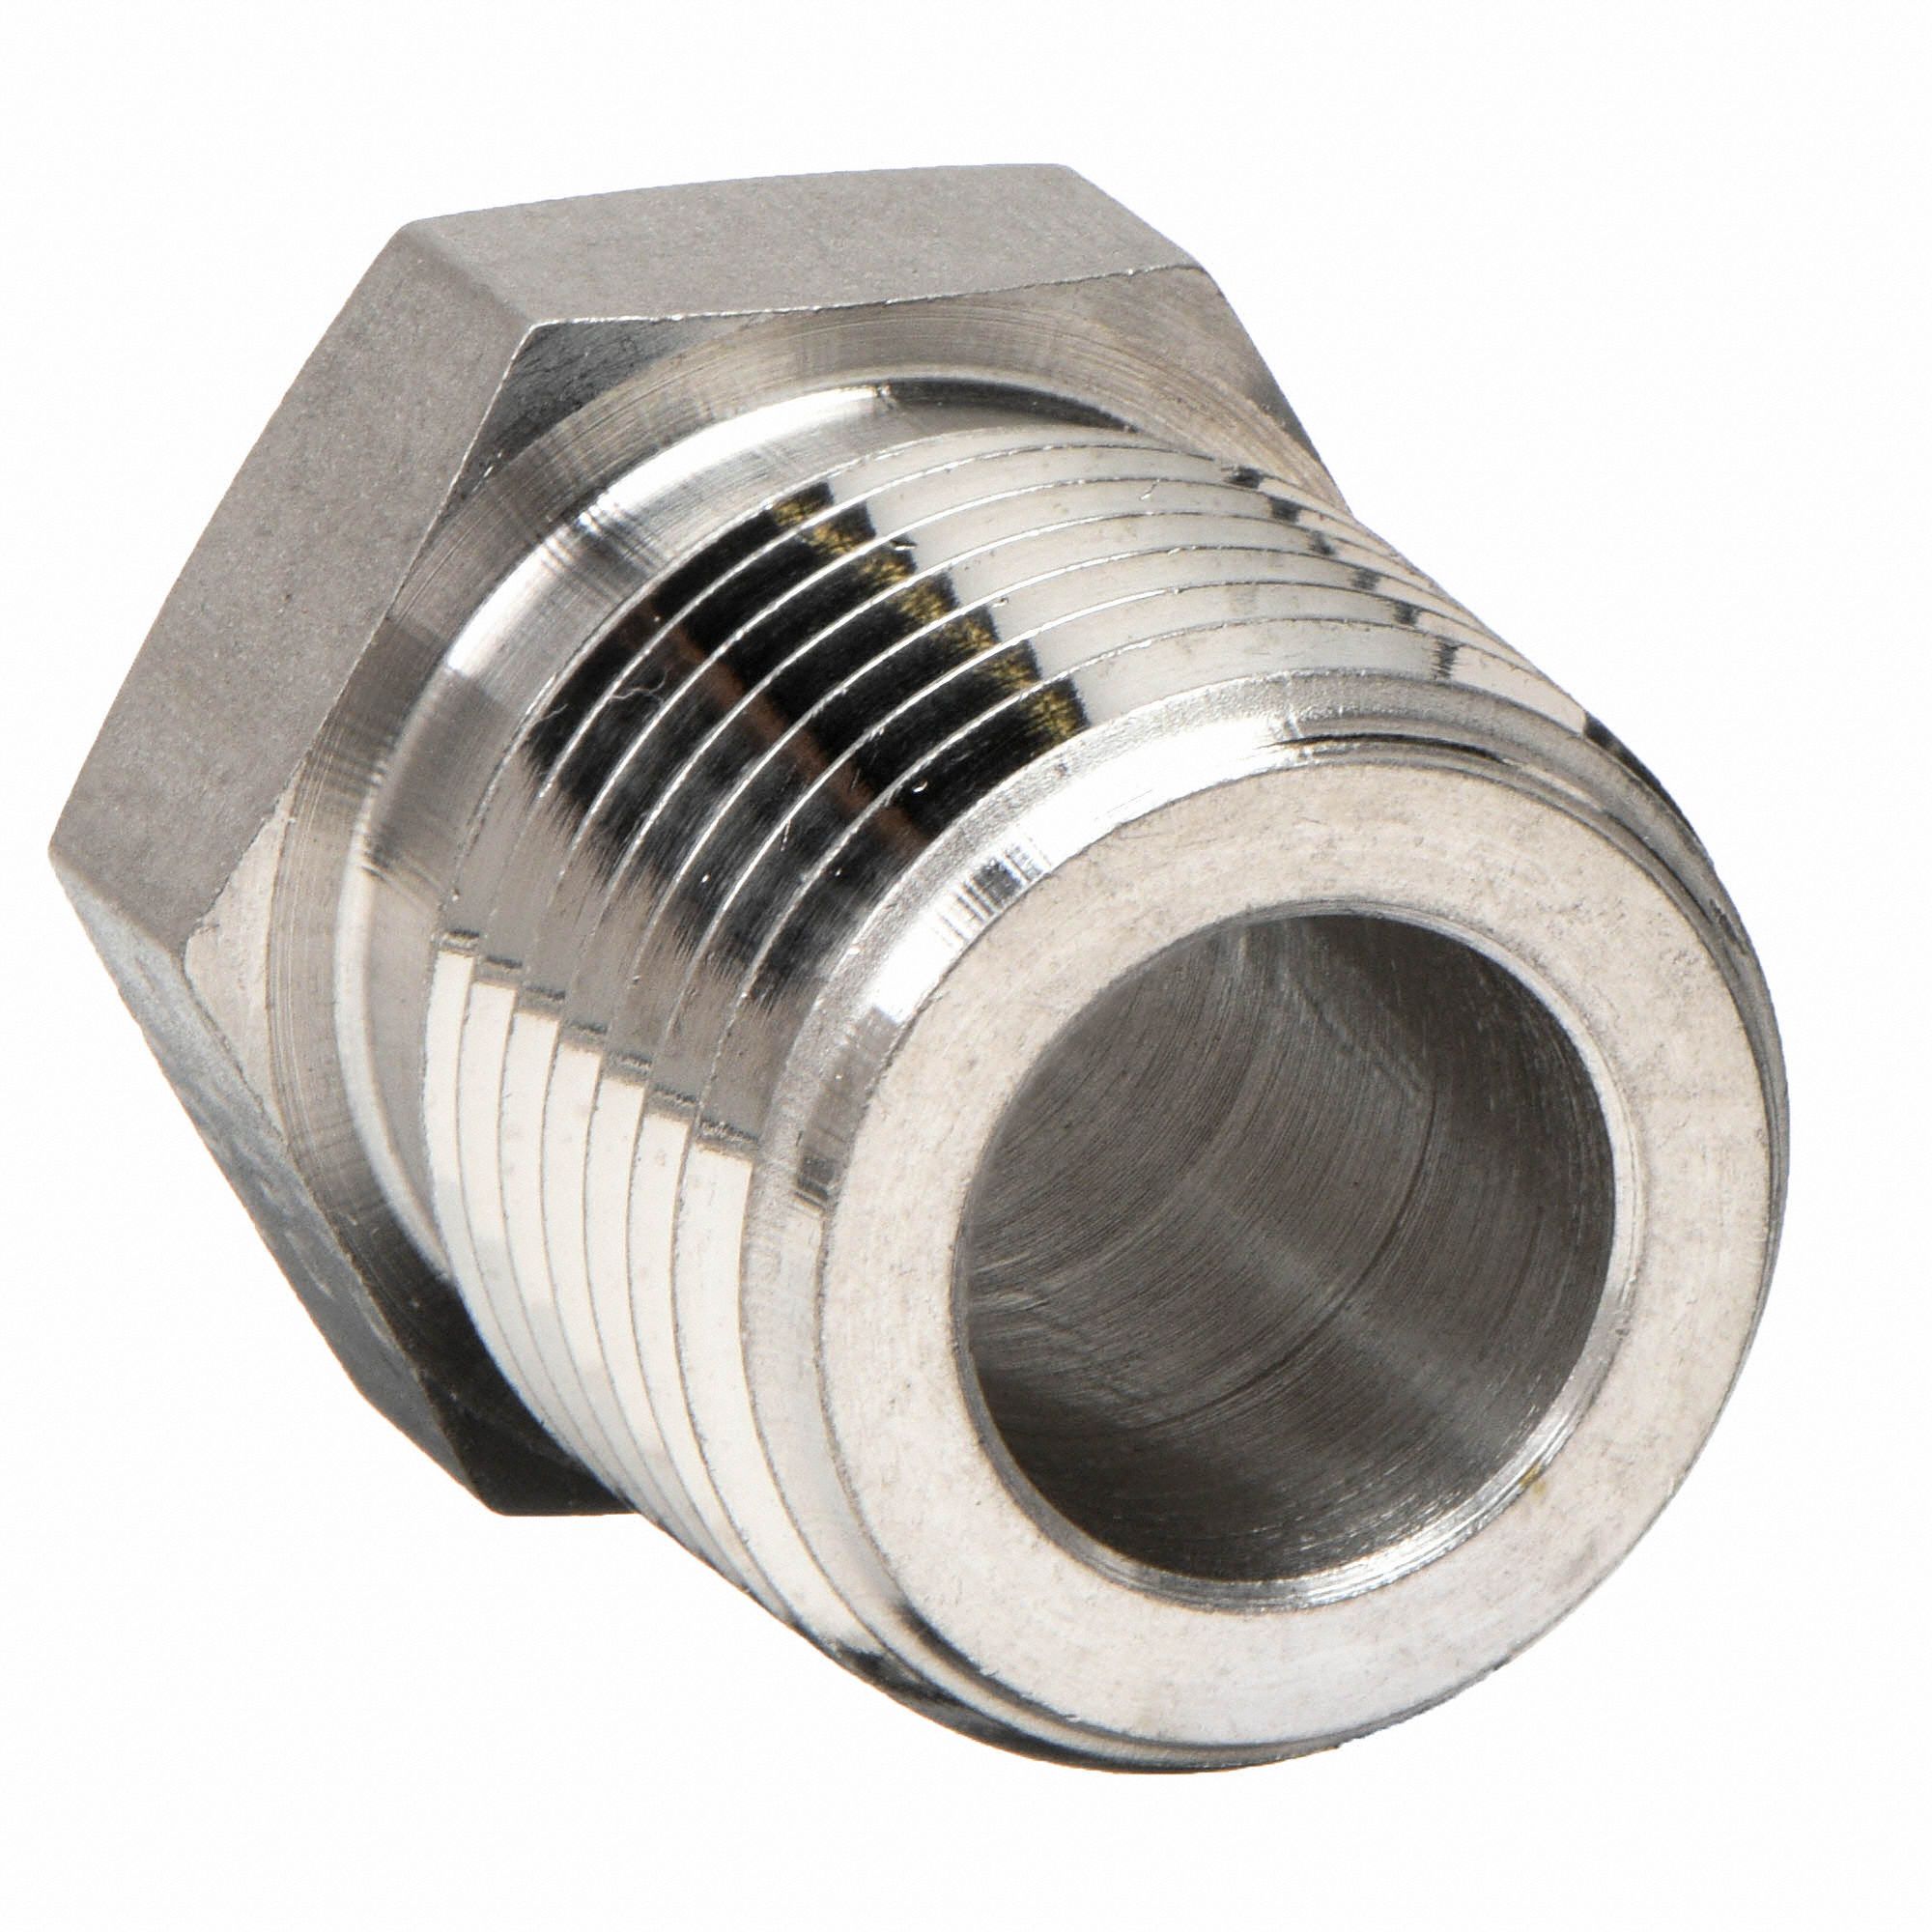 SS-MD-2 Swagelok 316 Stainless Steel vent protector NPT 1/8" 